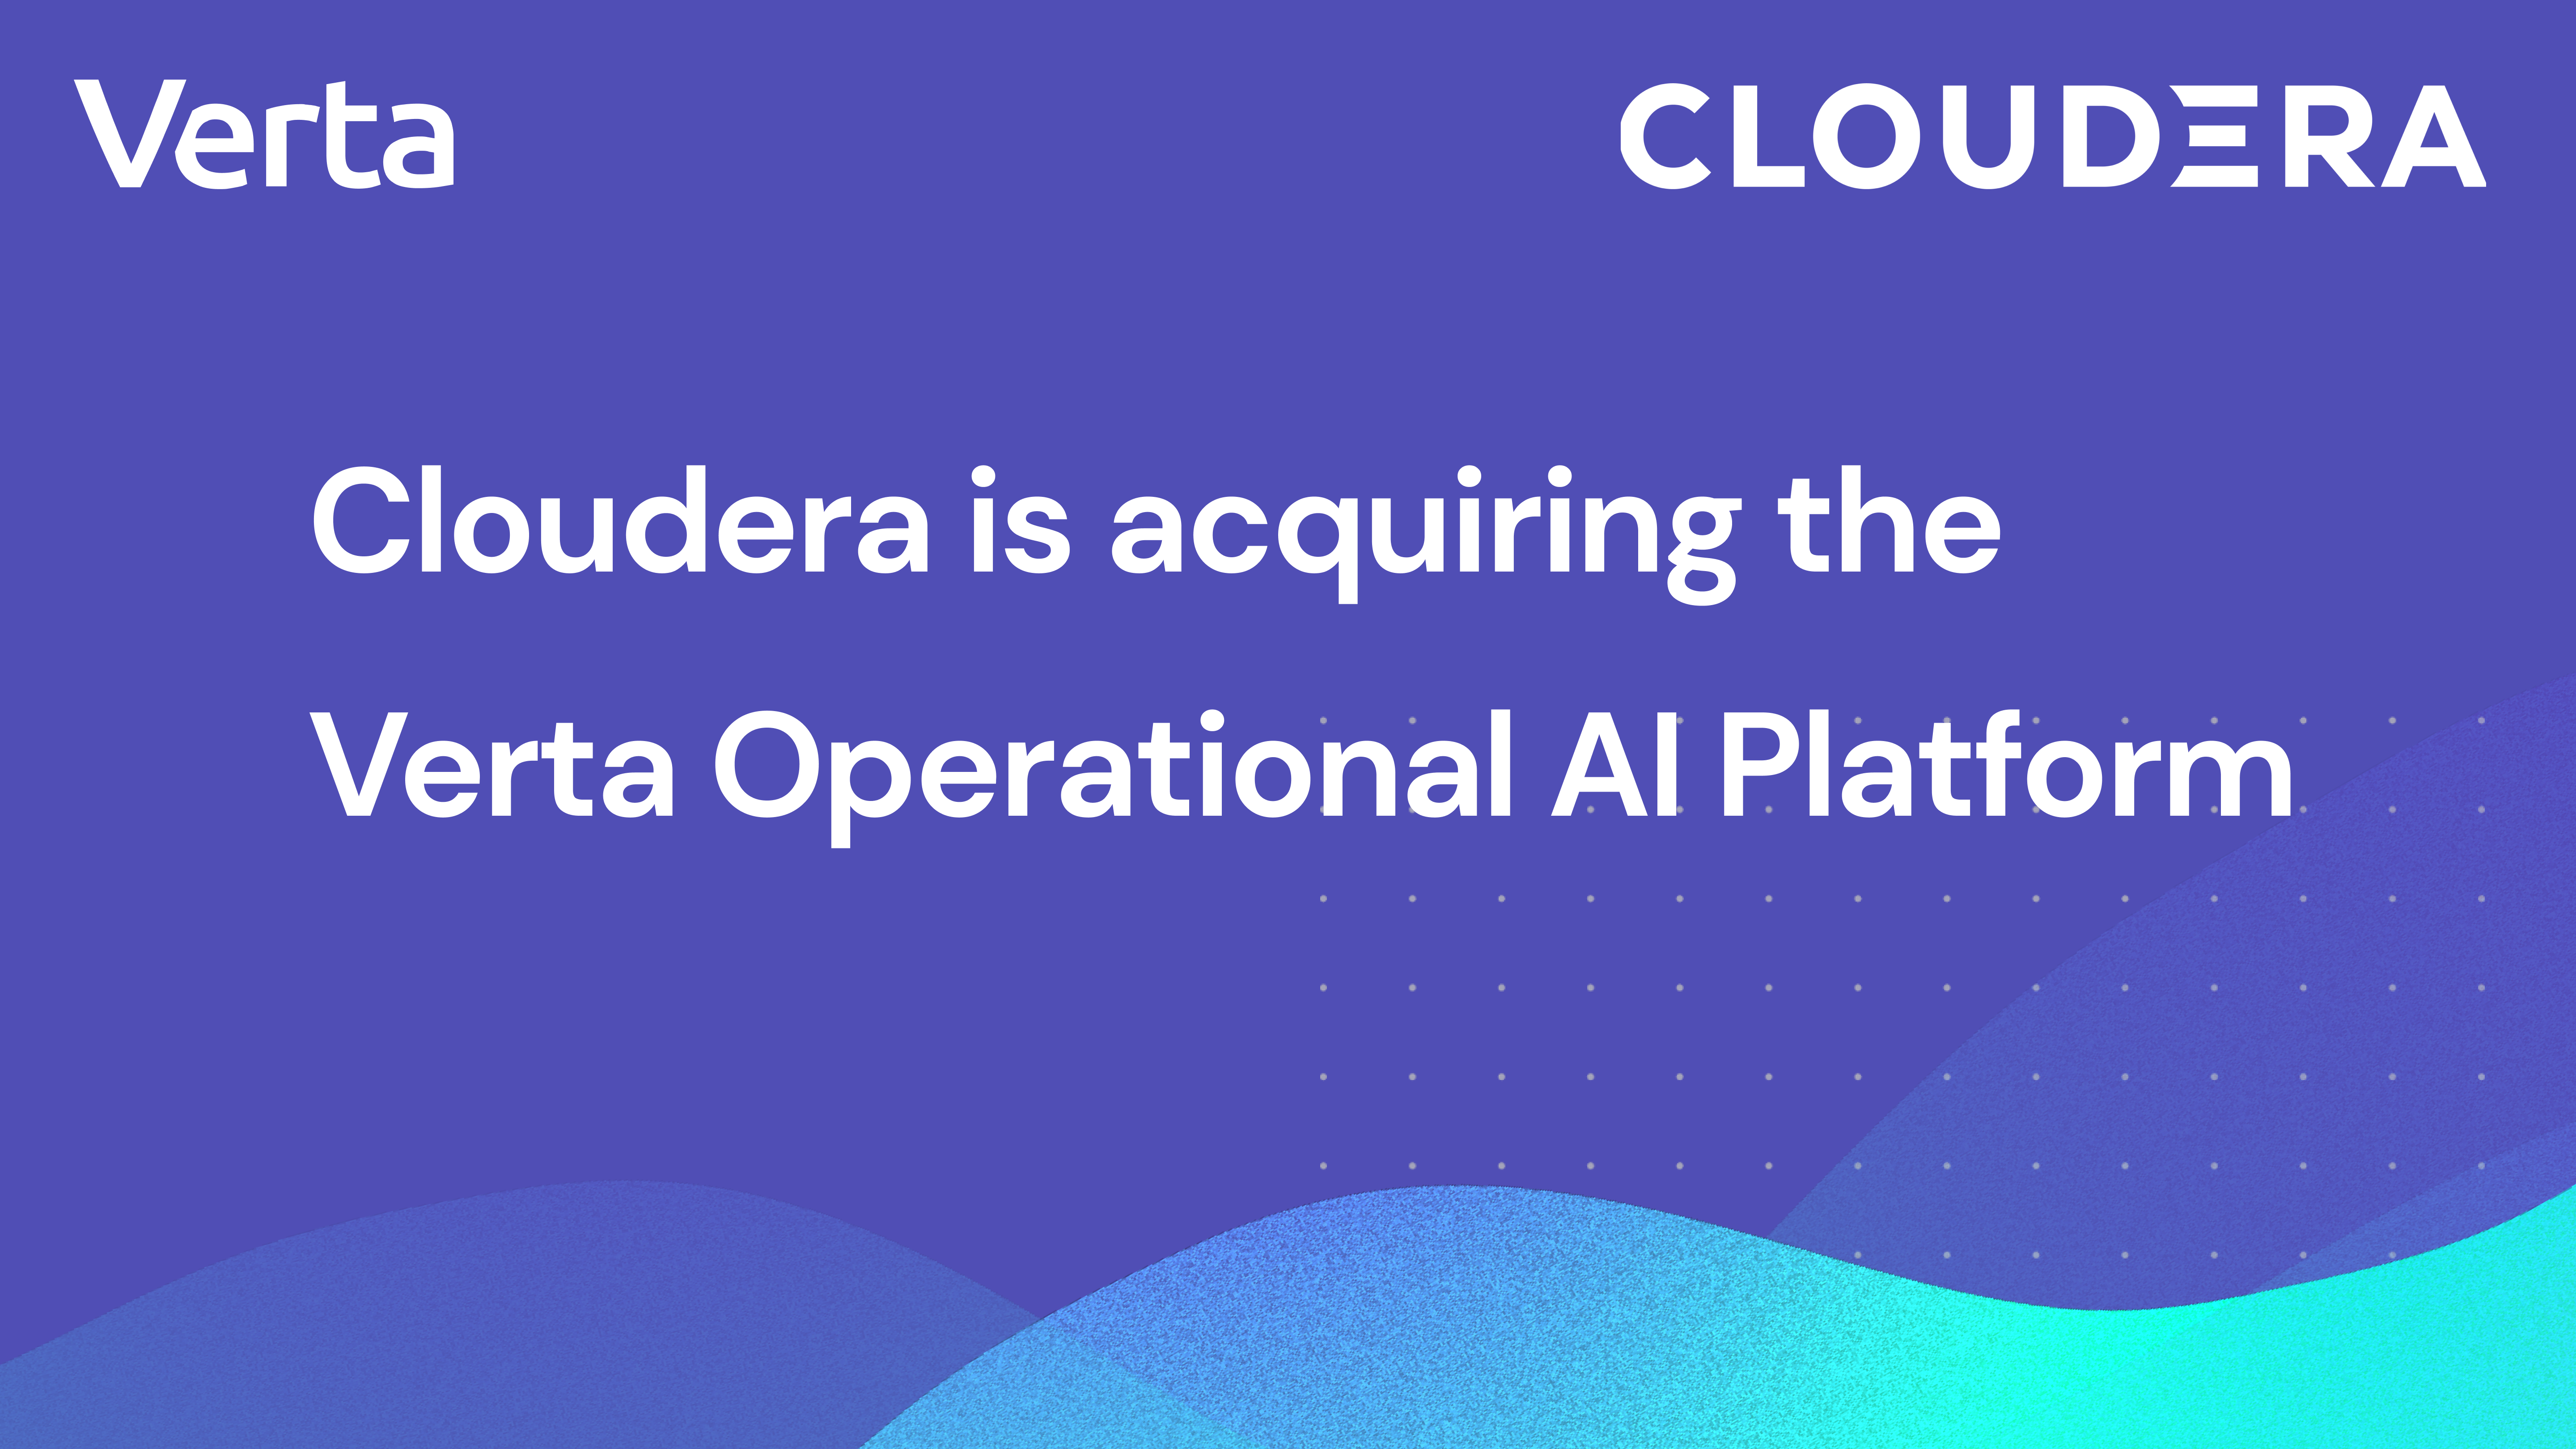 Cloudera acquires Verta奥5 Operational AI Platform to bring trusted, hybrid AI to the enterprise